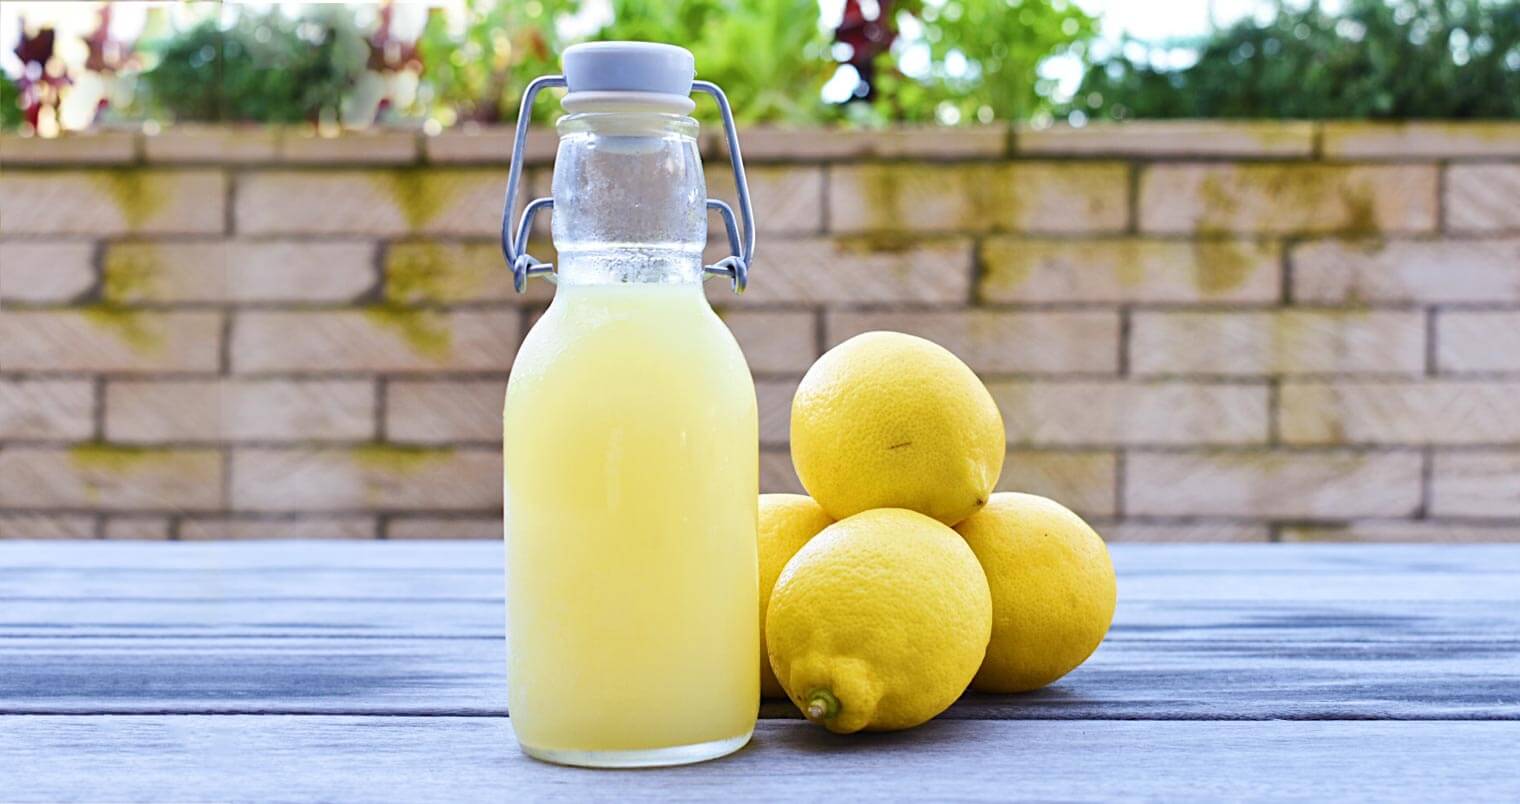 Il Brutto’s Limoncello, bottle and lemons, featured image